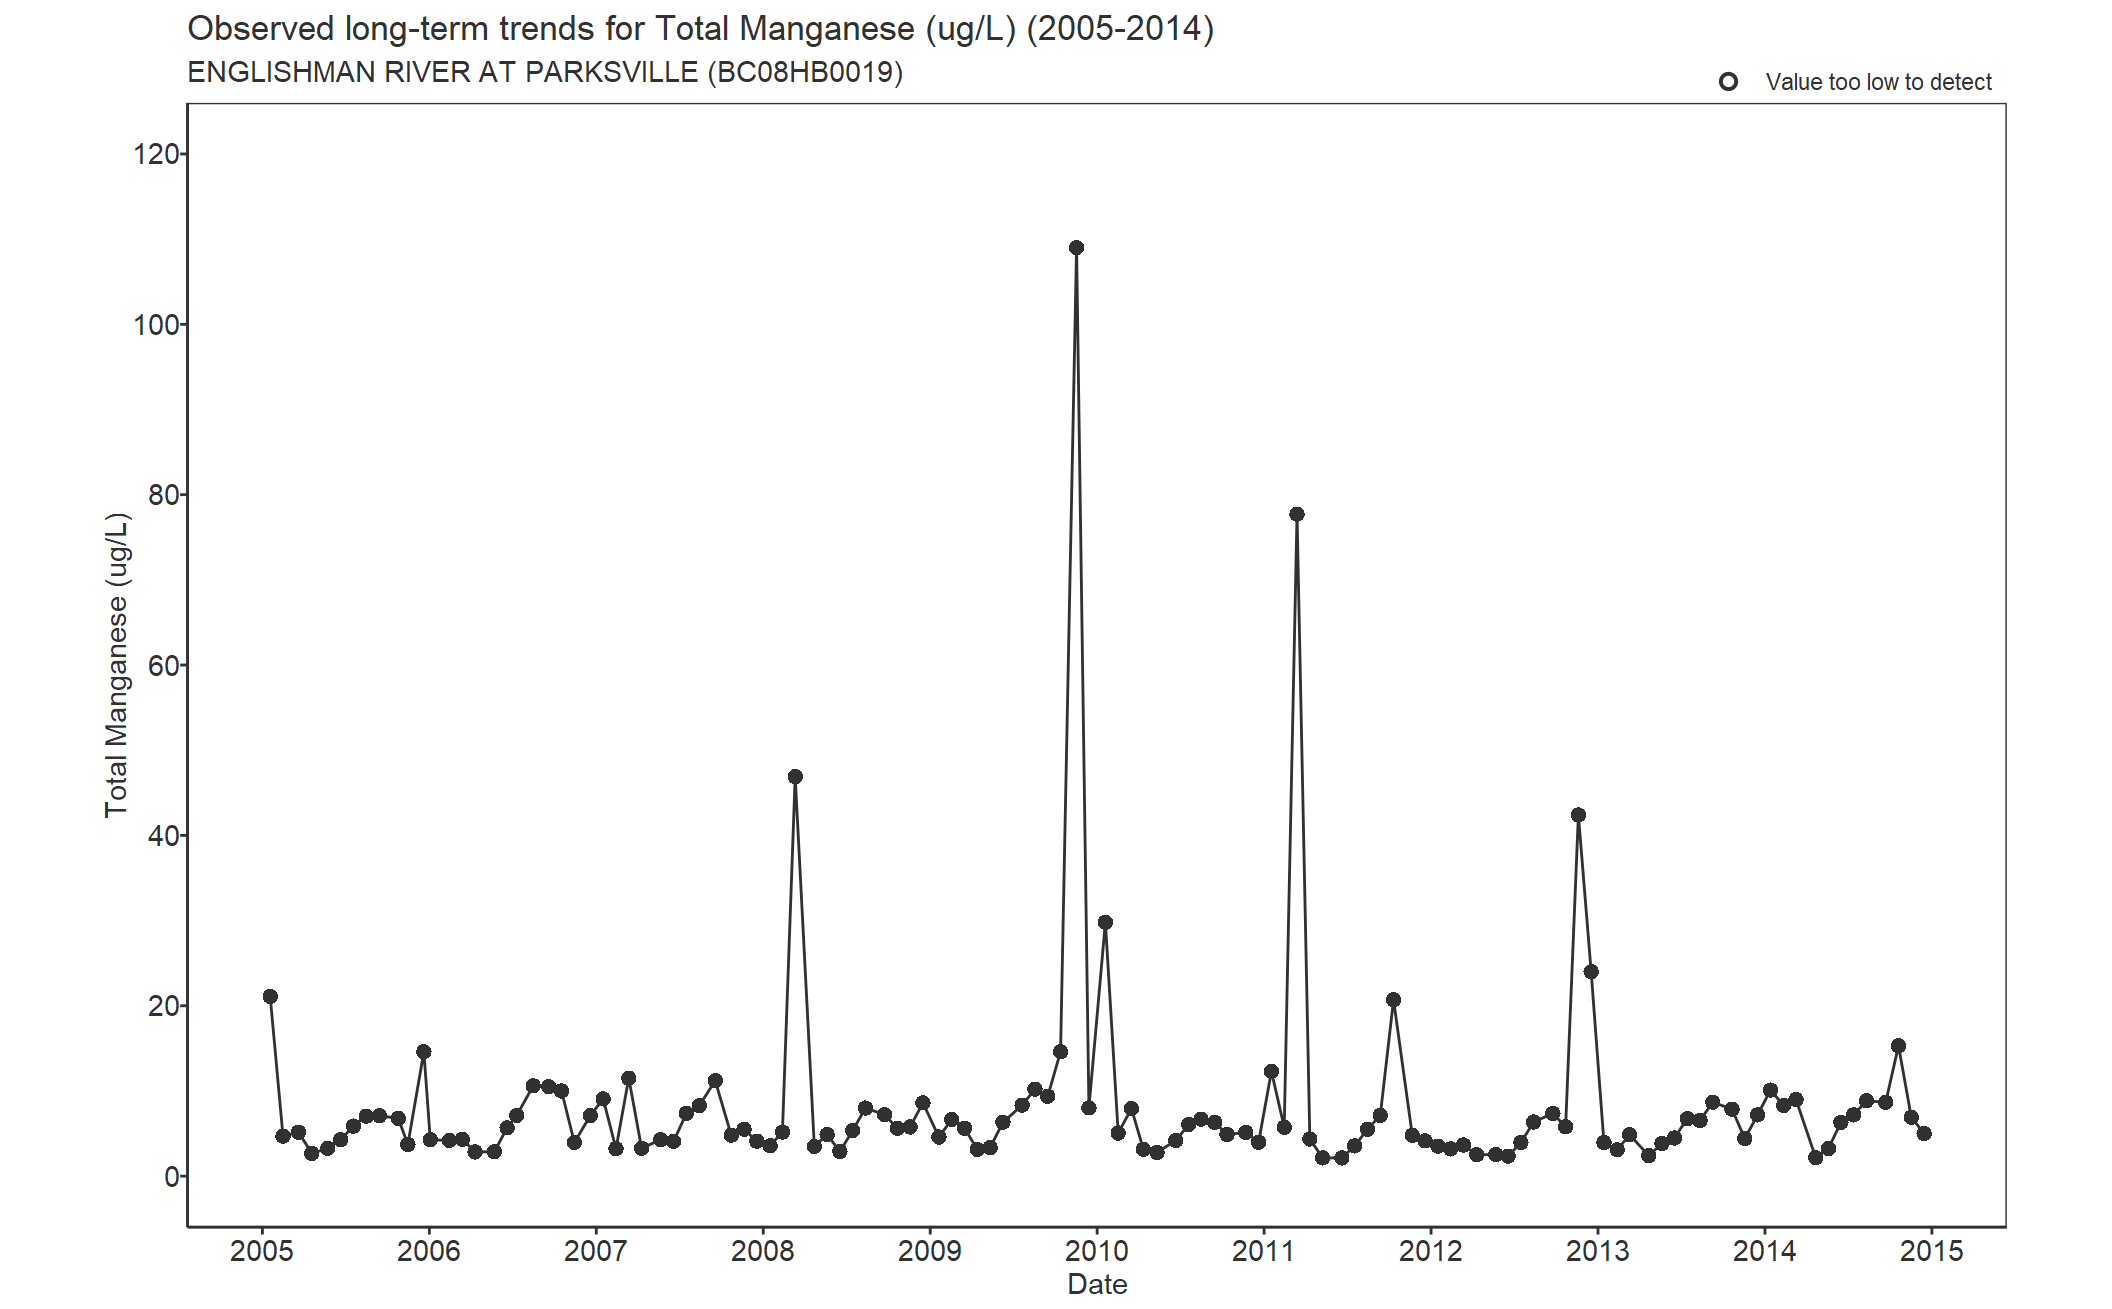 Observed long-term trends for Total Manganese (2005-2014)